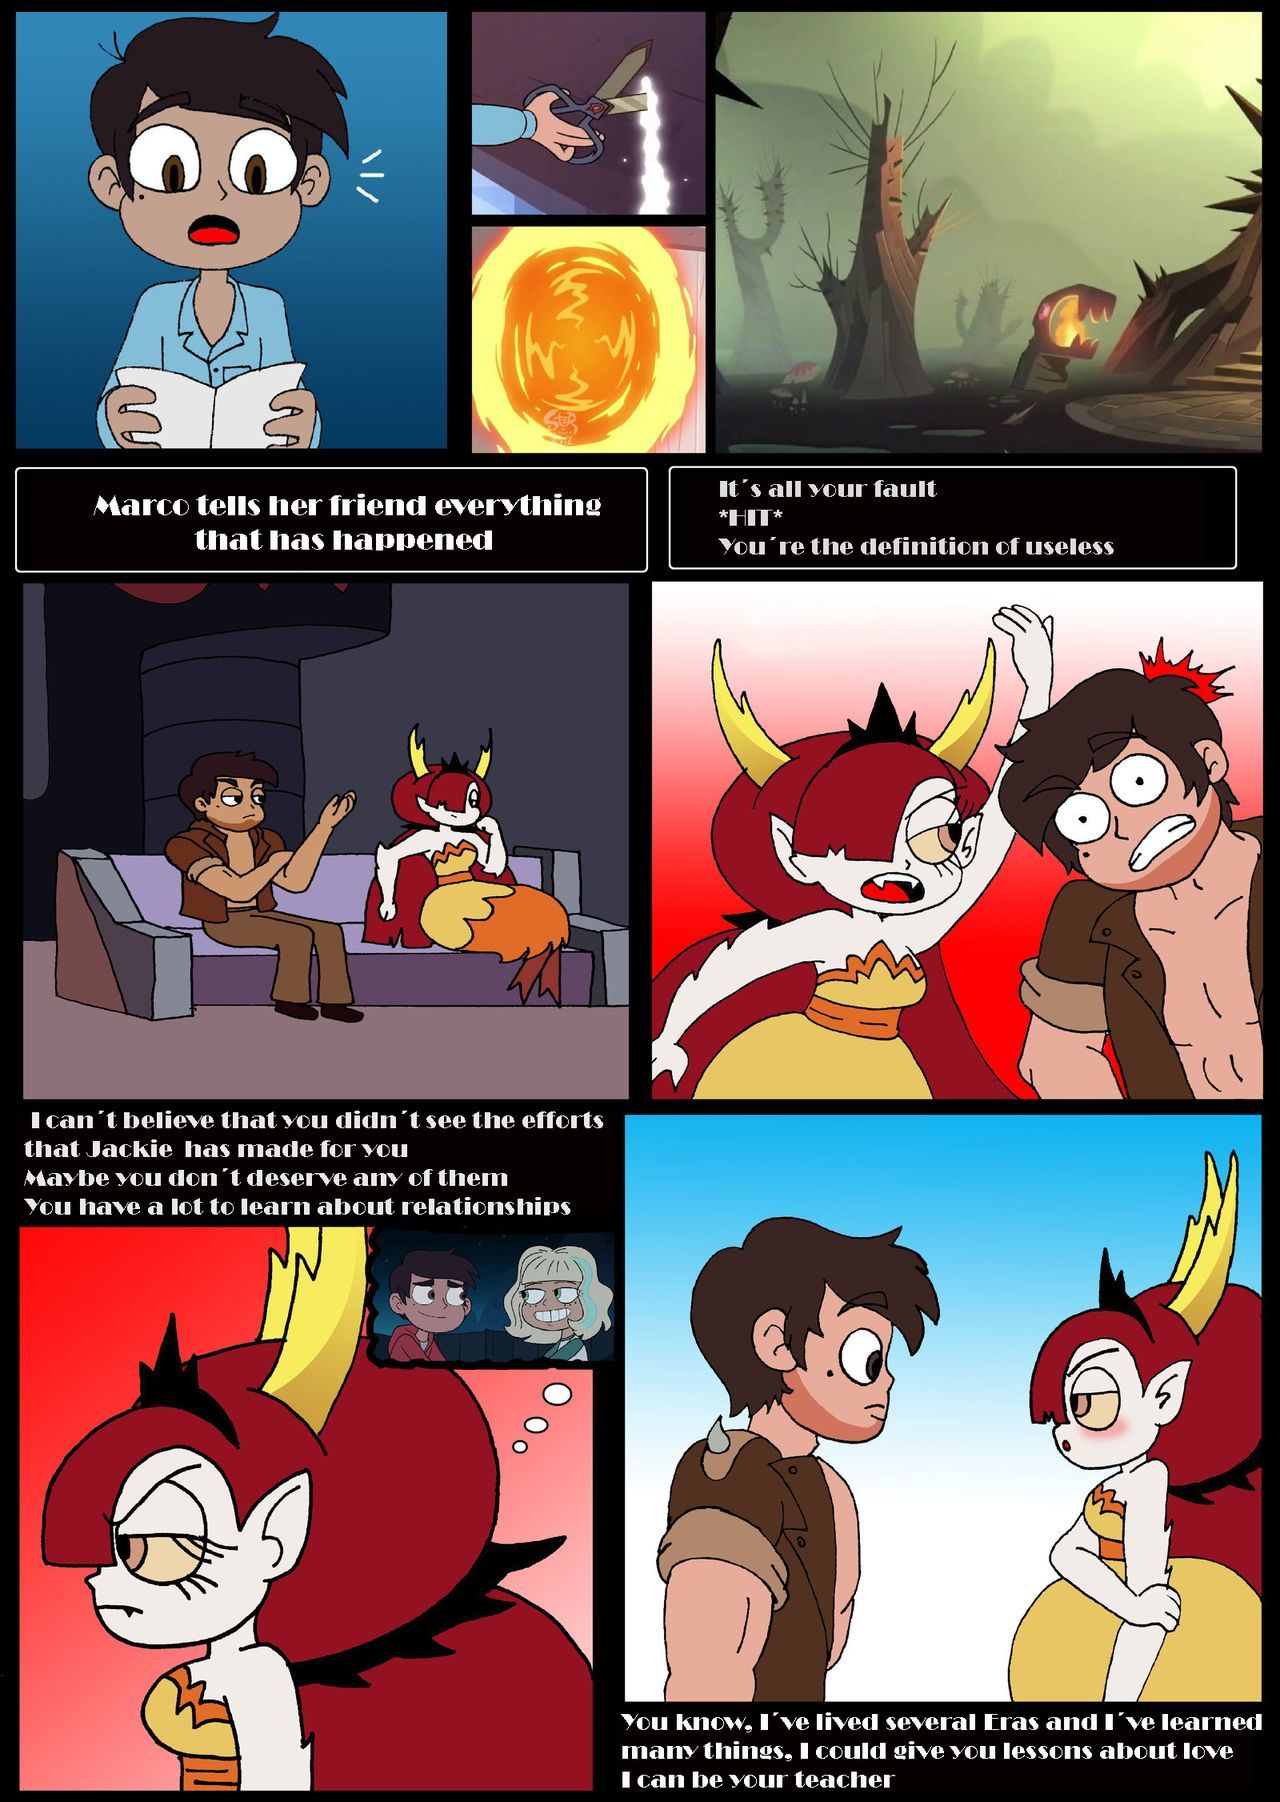 Playing with Fire (Star vs. the Forces of Evil) by Ferozyraptor page 6